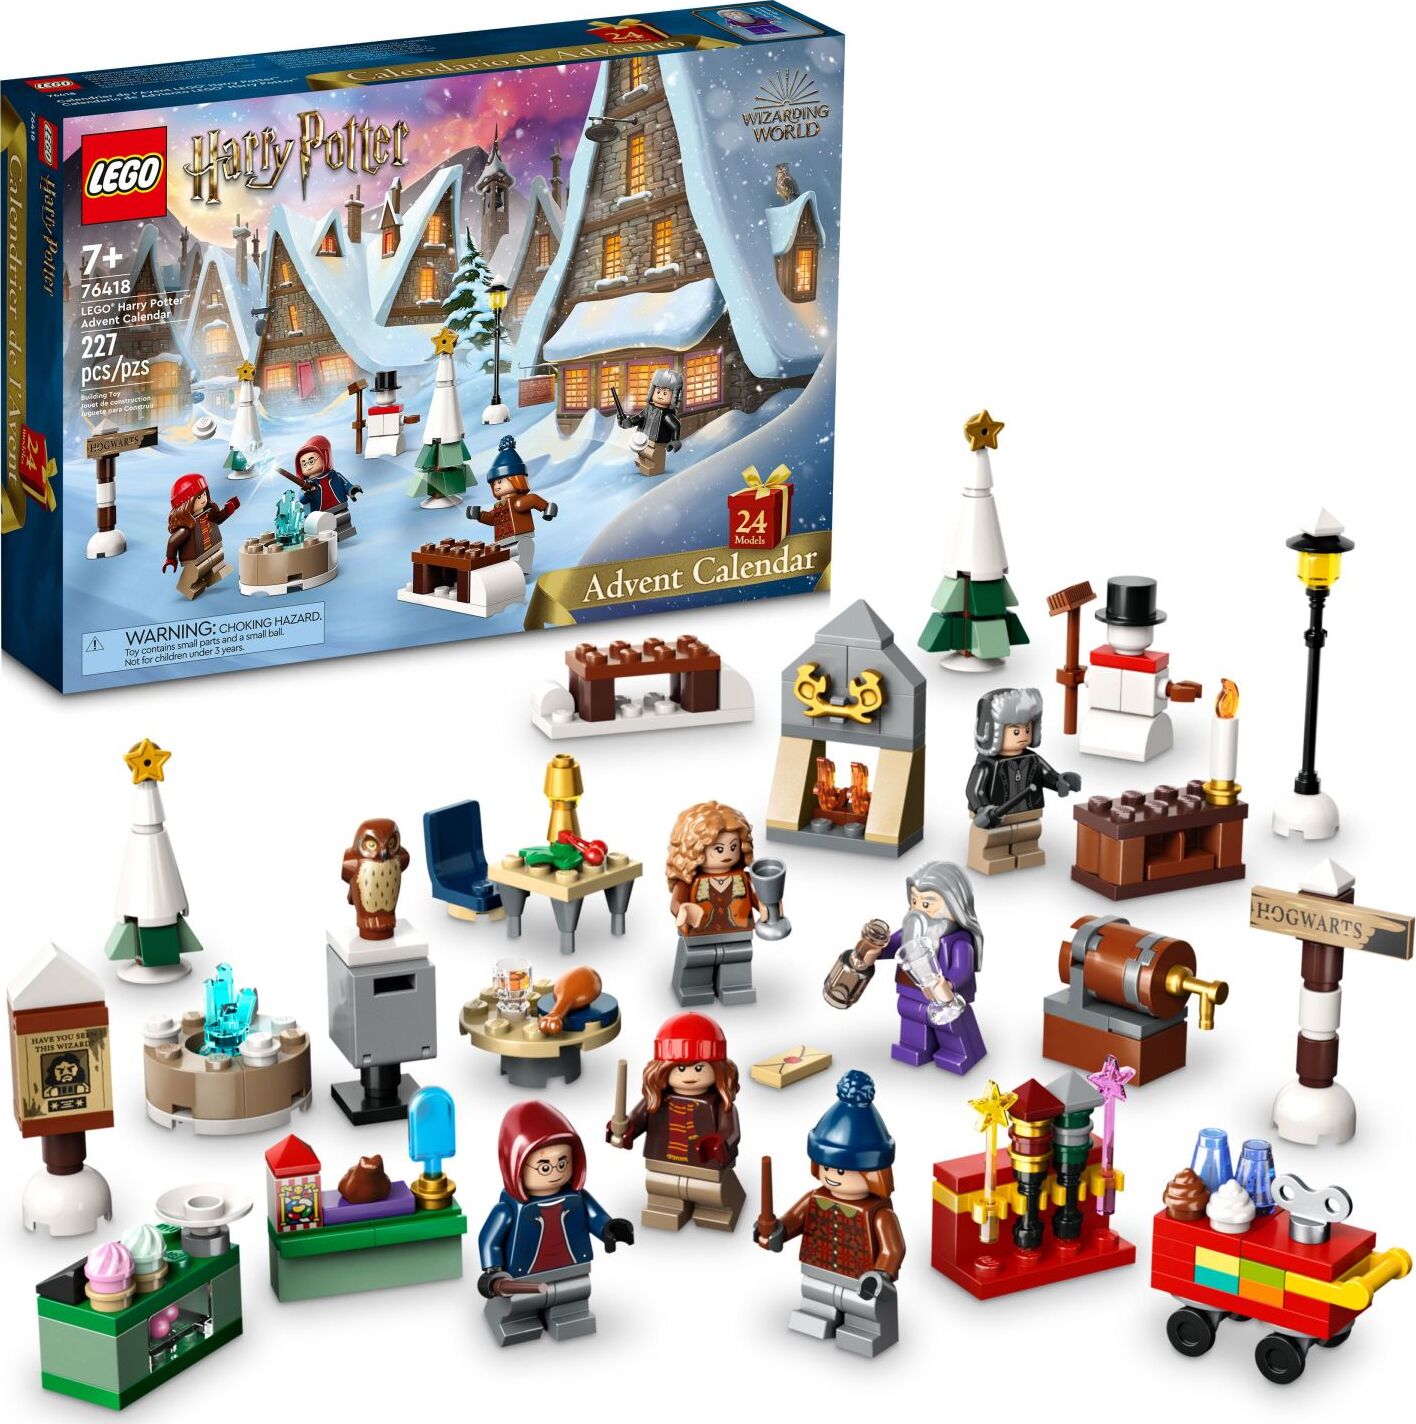 Combining LEGO Harry Potter sets & more!  Lego harry potter, Harry potter  lego sets, Harry potter set